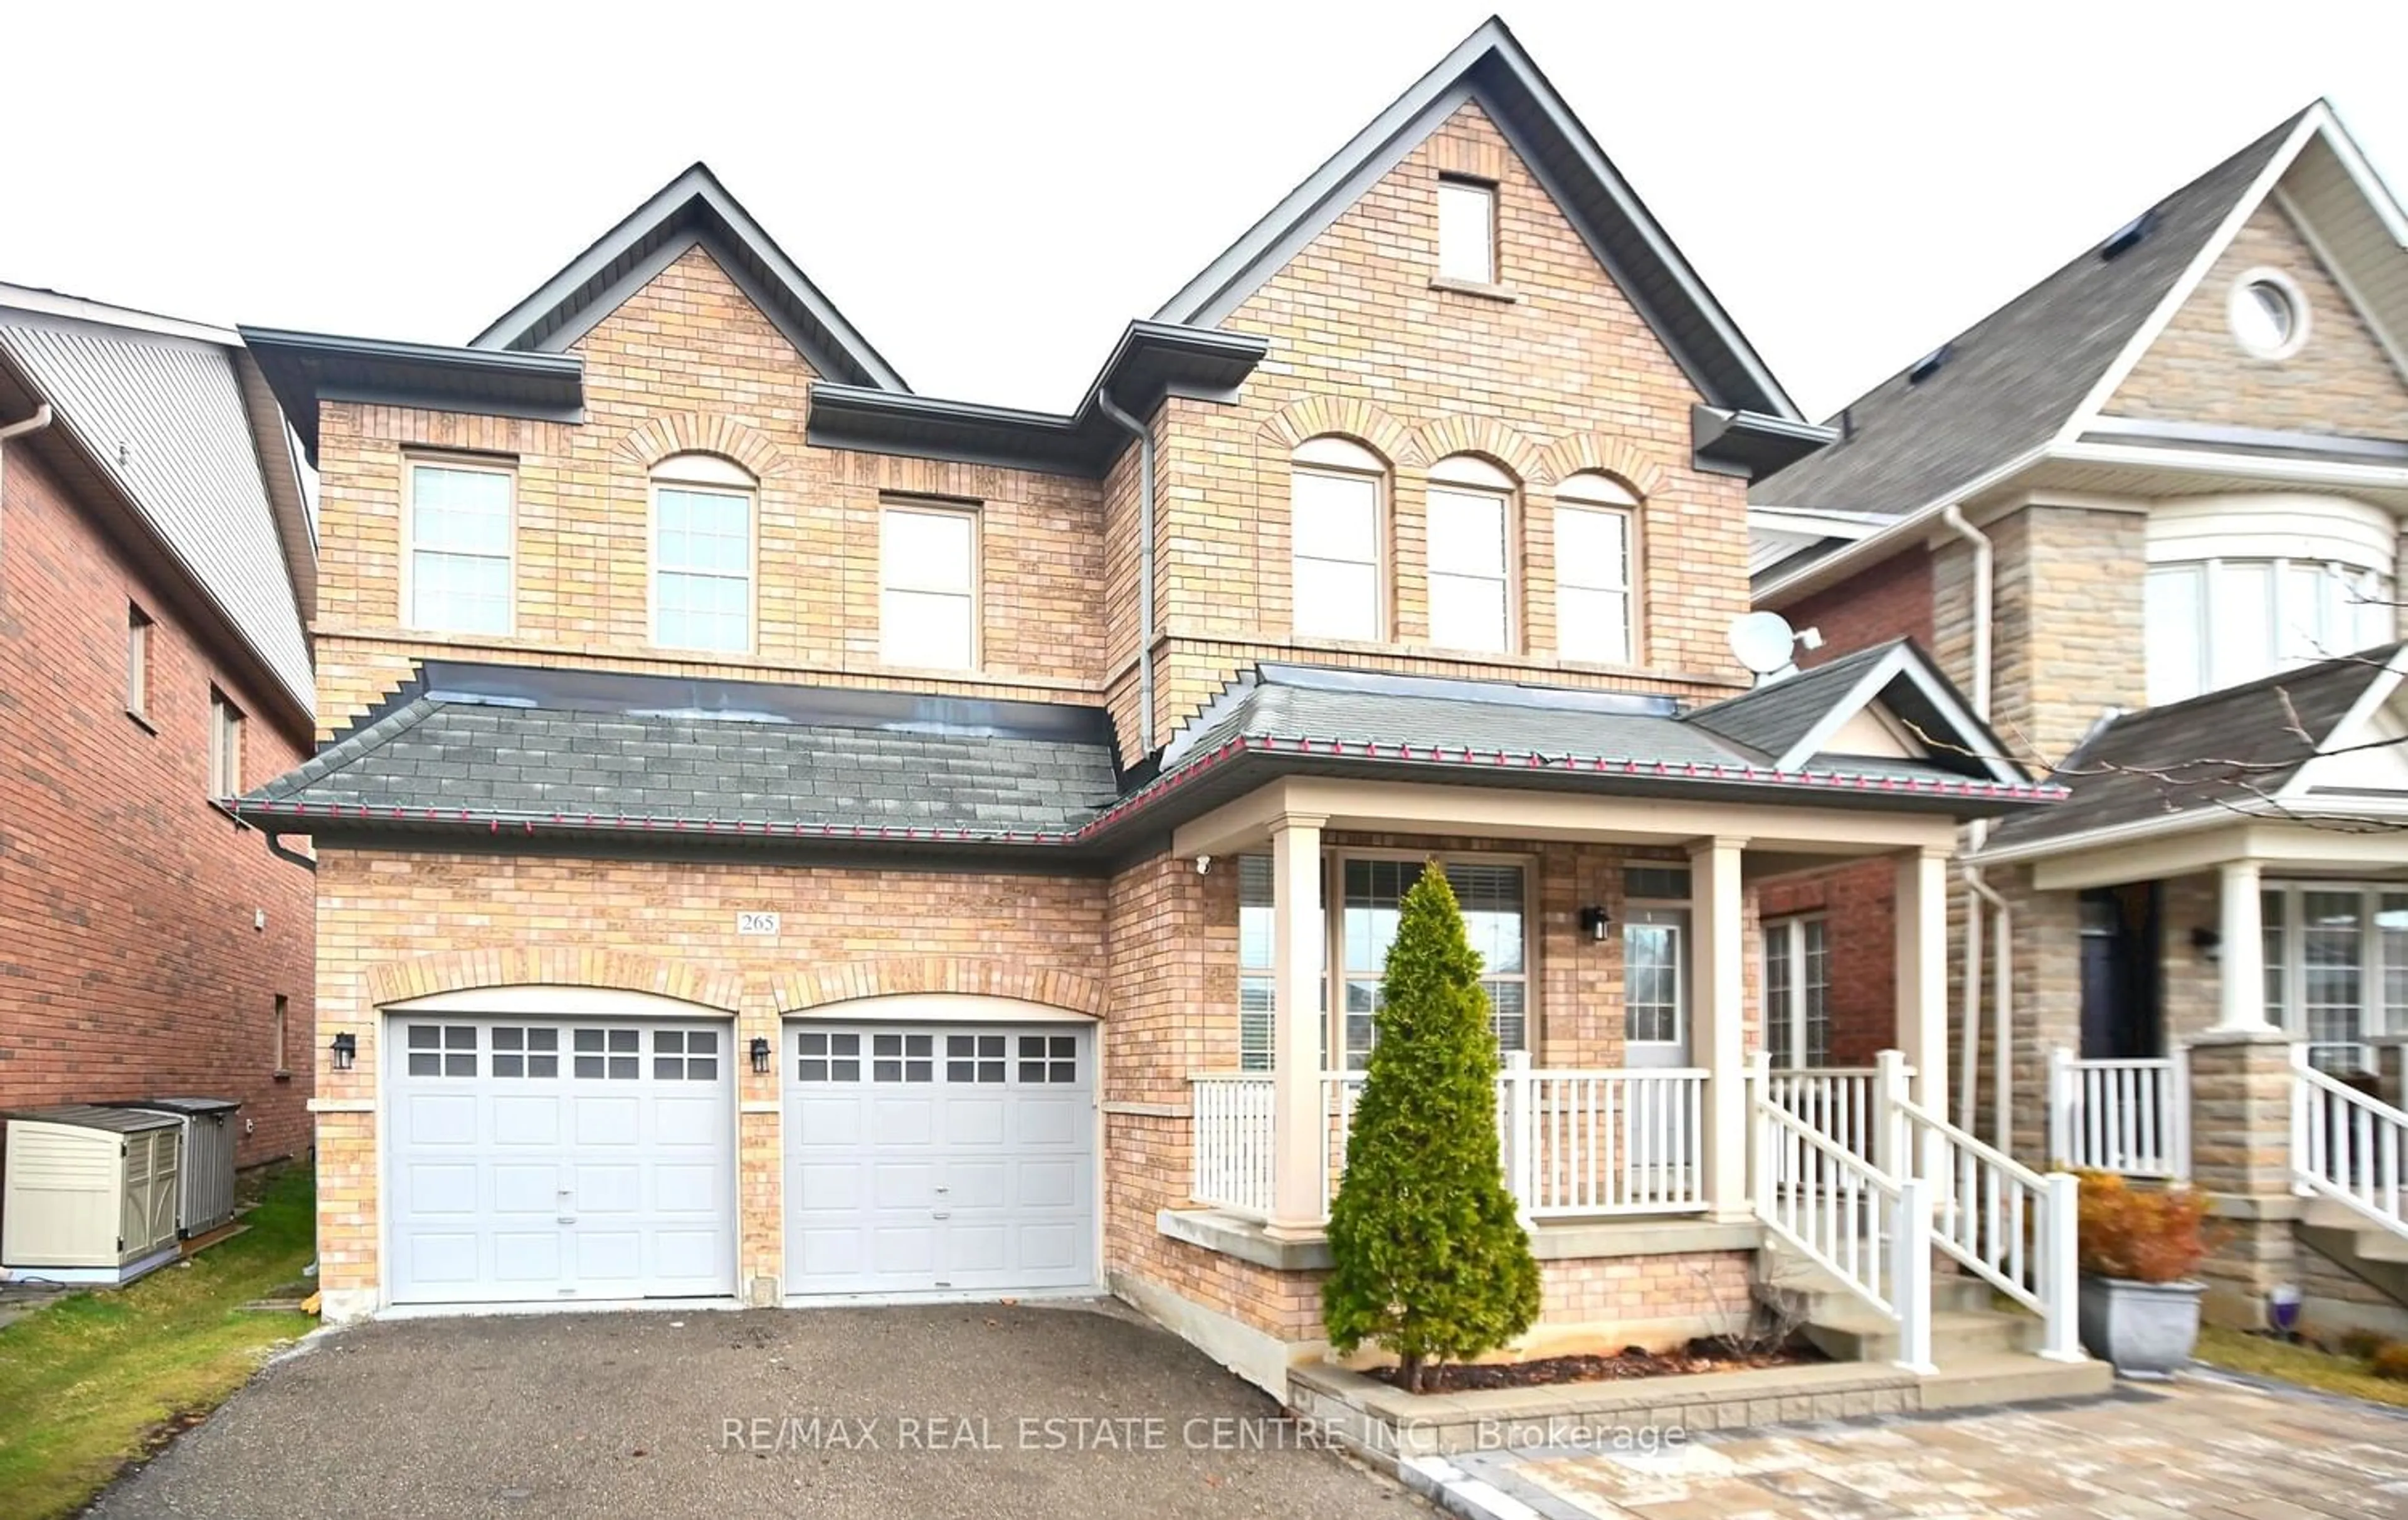 Home with brick exterior material for 265 Scott Blvd, Milton Ontario L9T 6Z8